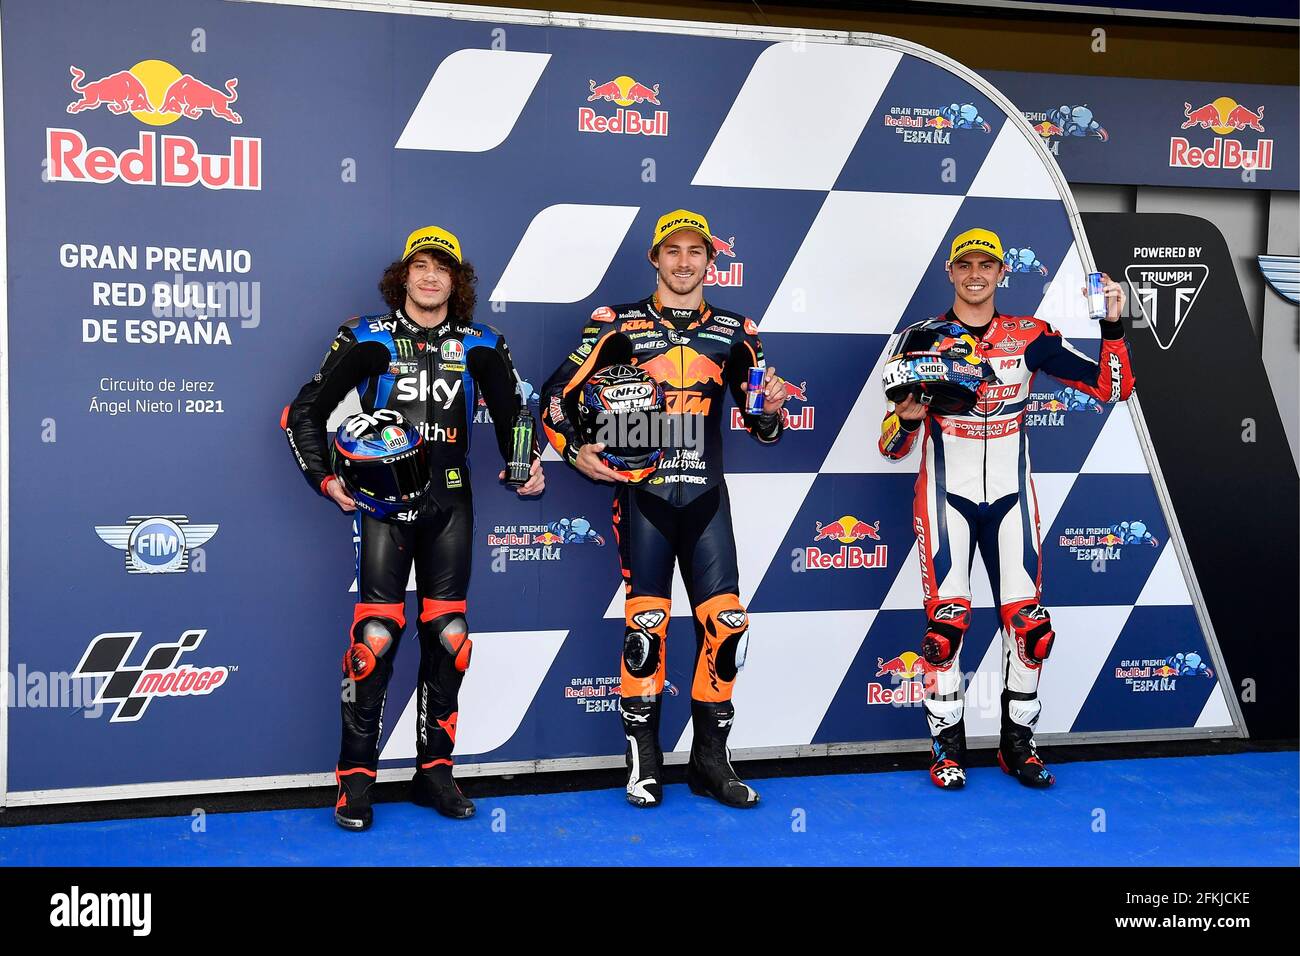 Spain May 1, 2021, Qualifying for MotoGP Grand Prix Red Bull of Spain at  Jerez circuit, Spain May 1, 2021 In picture: Moto2™ front row L-R: Gardner,  Lowes and Vierge Clasificacion del